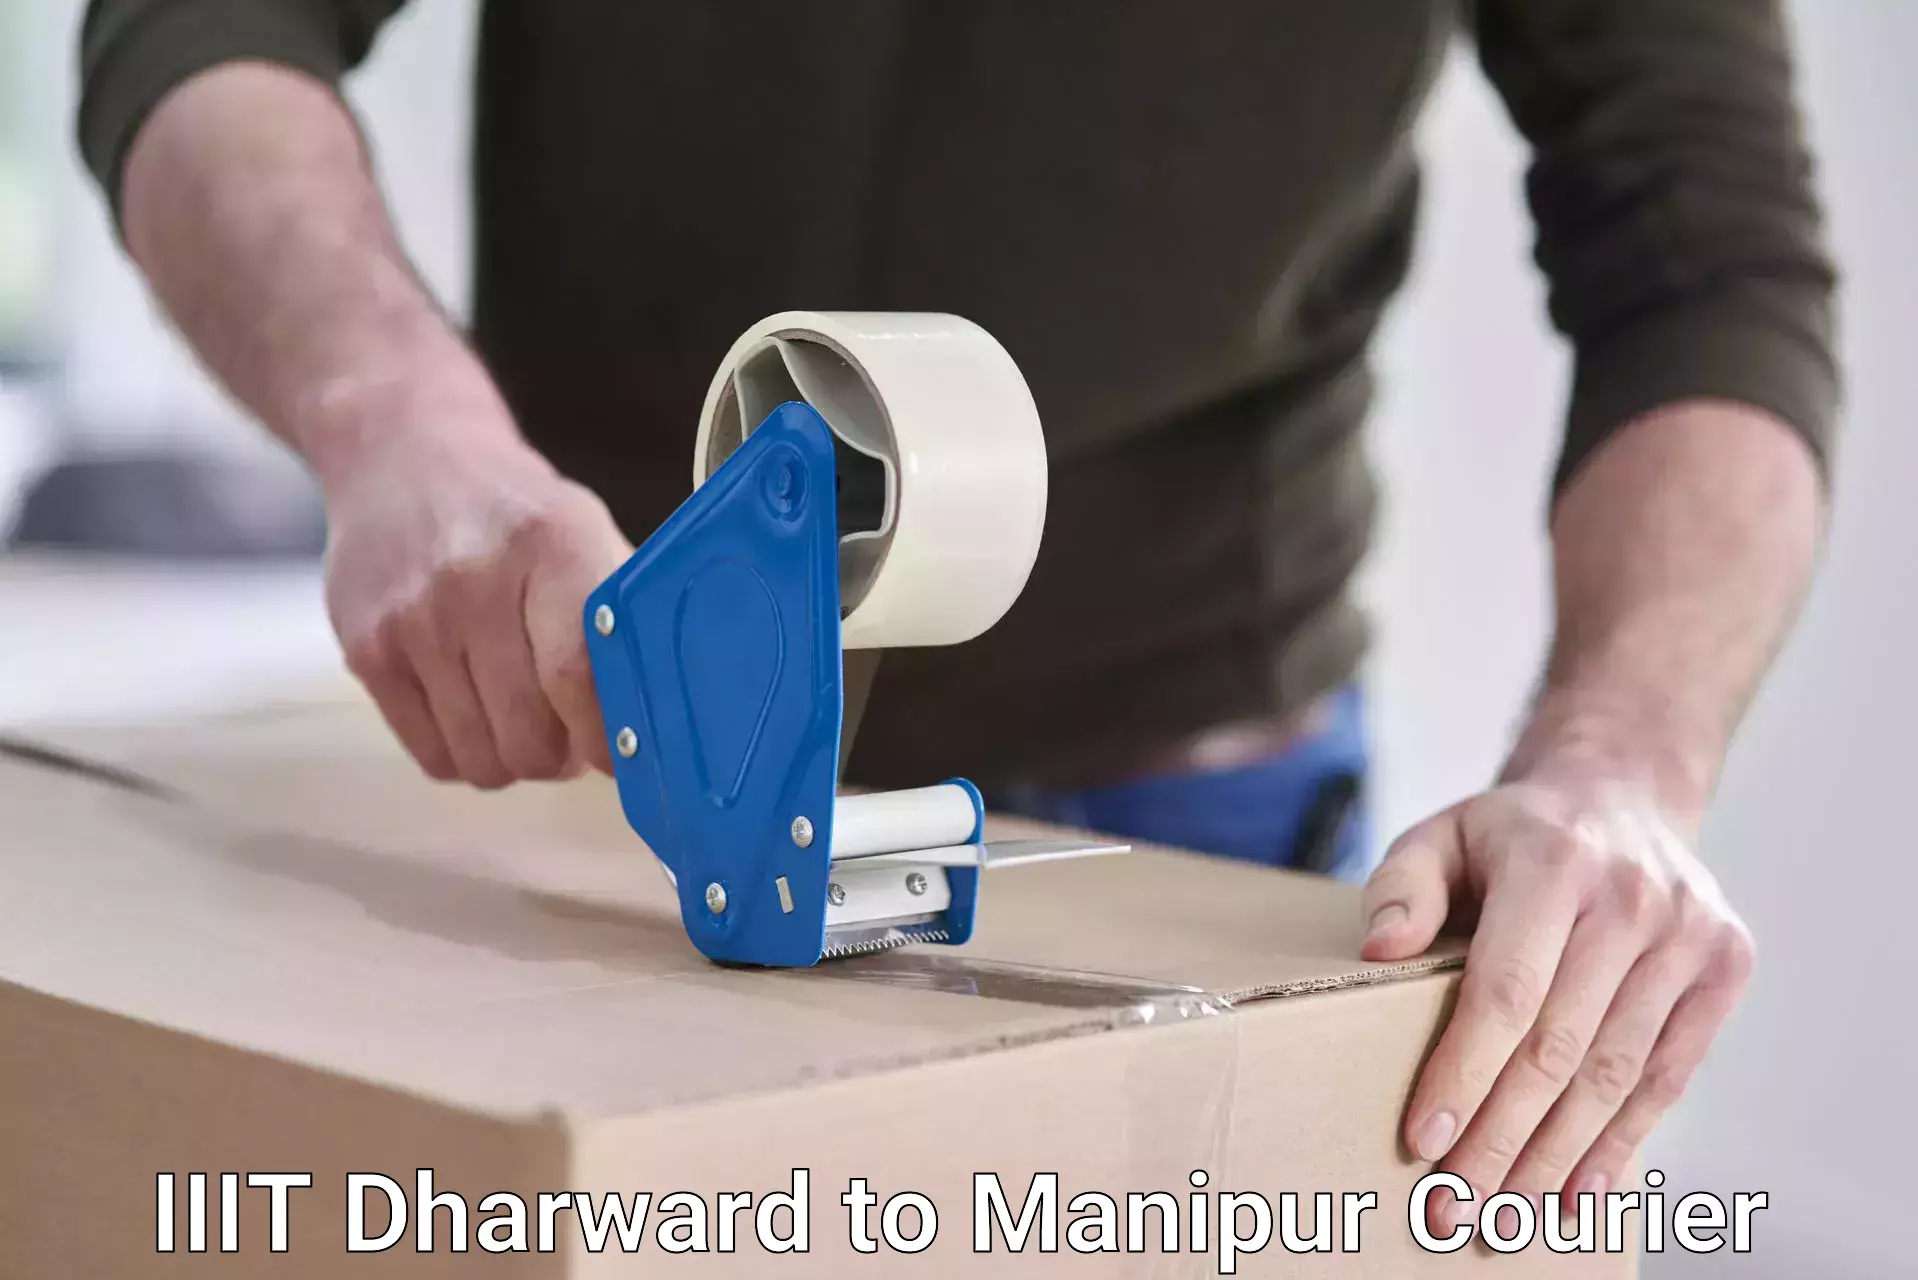 Courier service partnerships IIIT Dharward to Manipur